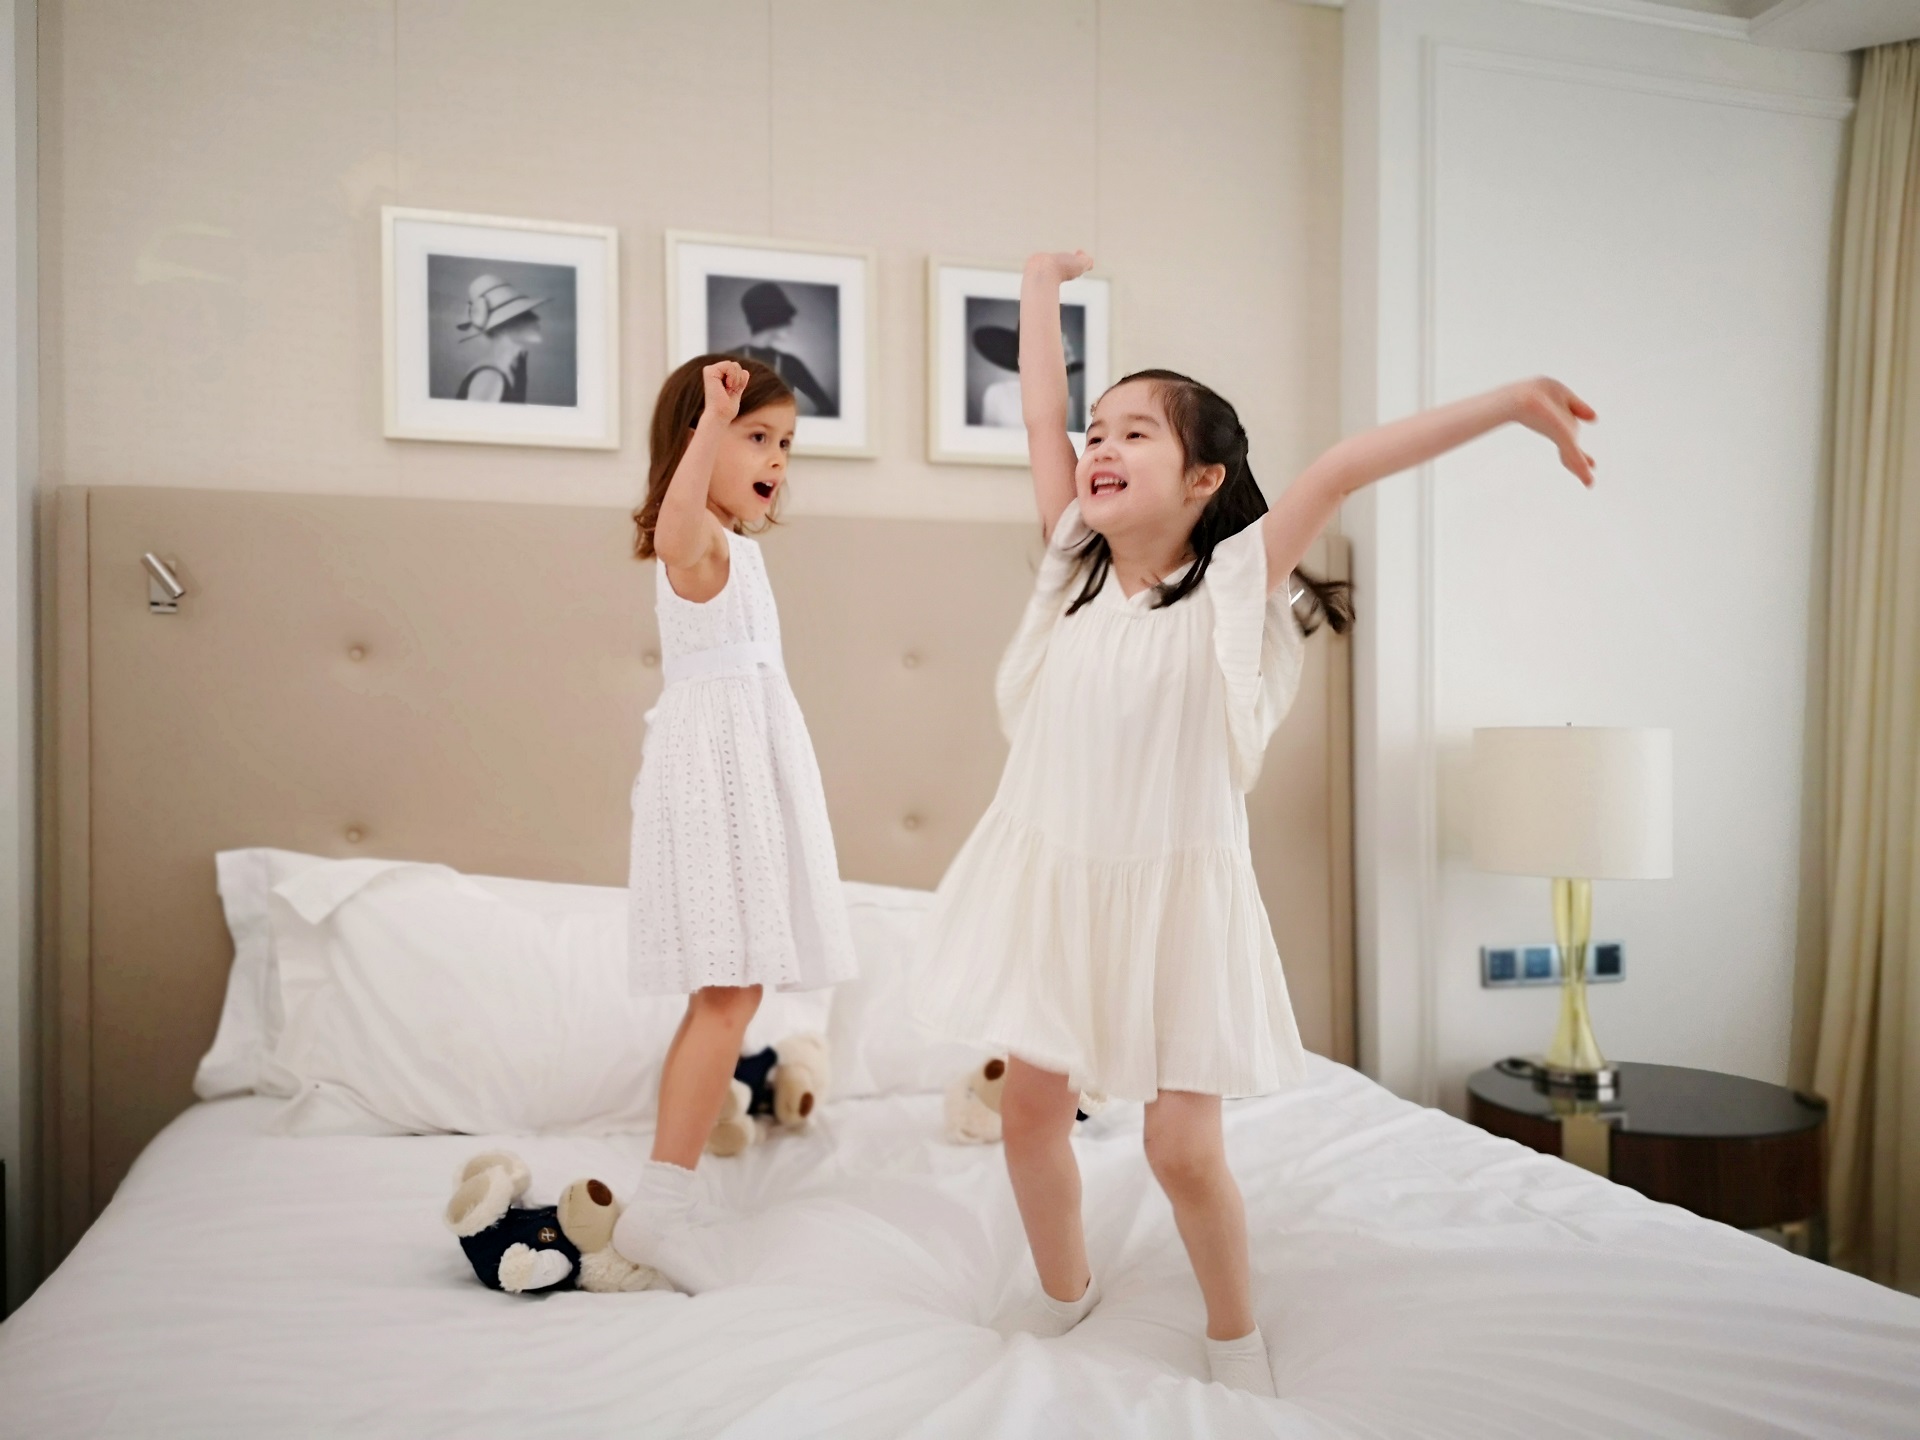 tlhkg-offer-stay-family-first-staycation